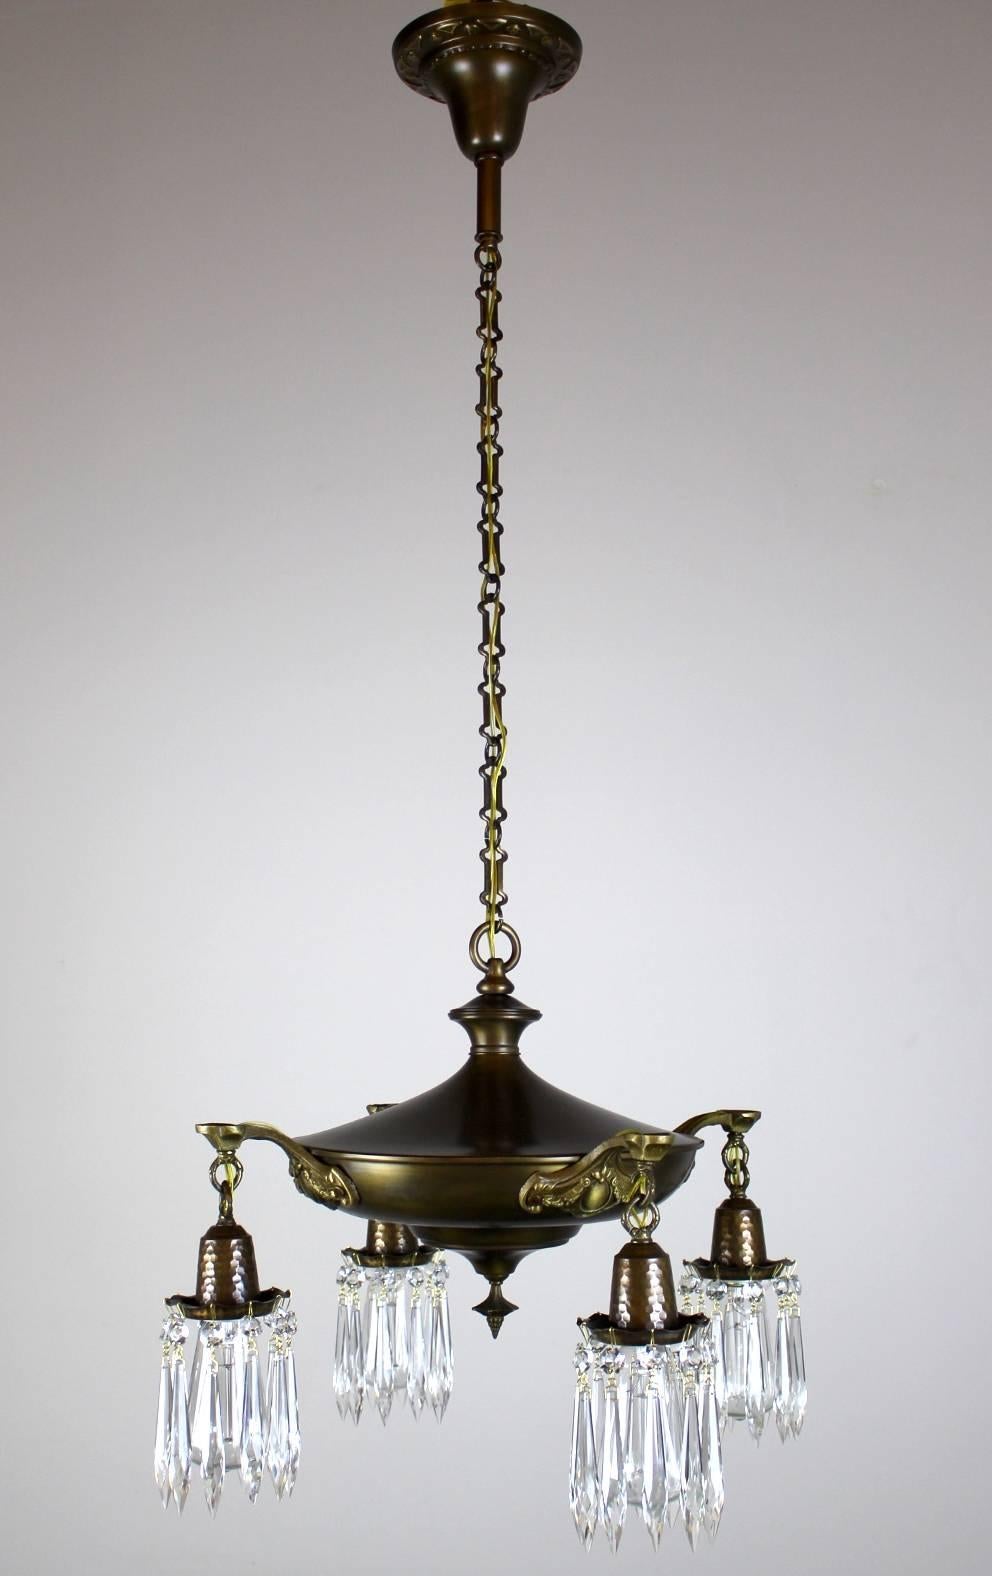 Sturdy four-light pan fixture, circa 1915, this light is finished in a two tone antique brass with details highlighted.
The decorative chain and crystals hanging from each of the hammered bulb holders really set this fixture off.
Measures: 43